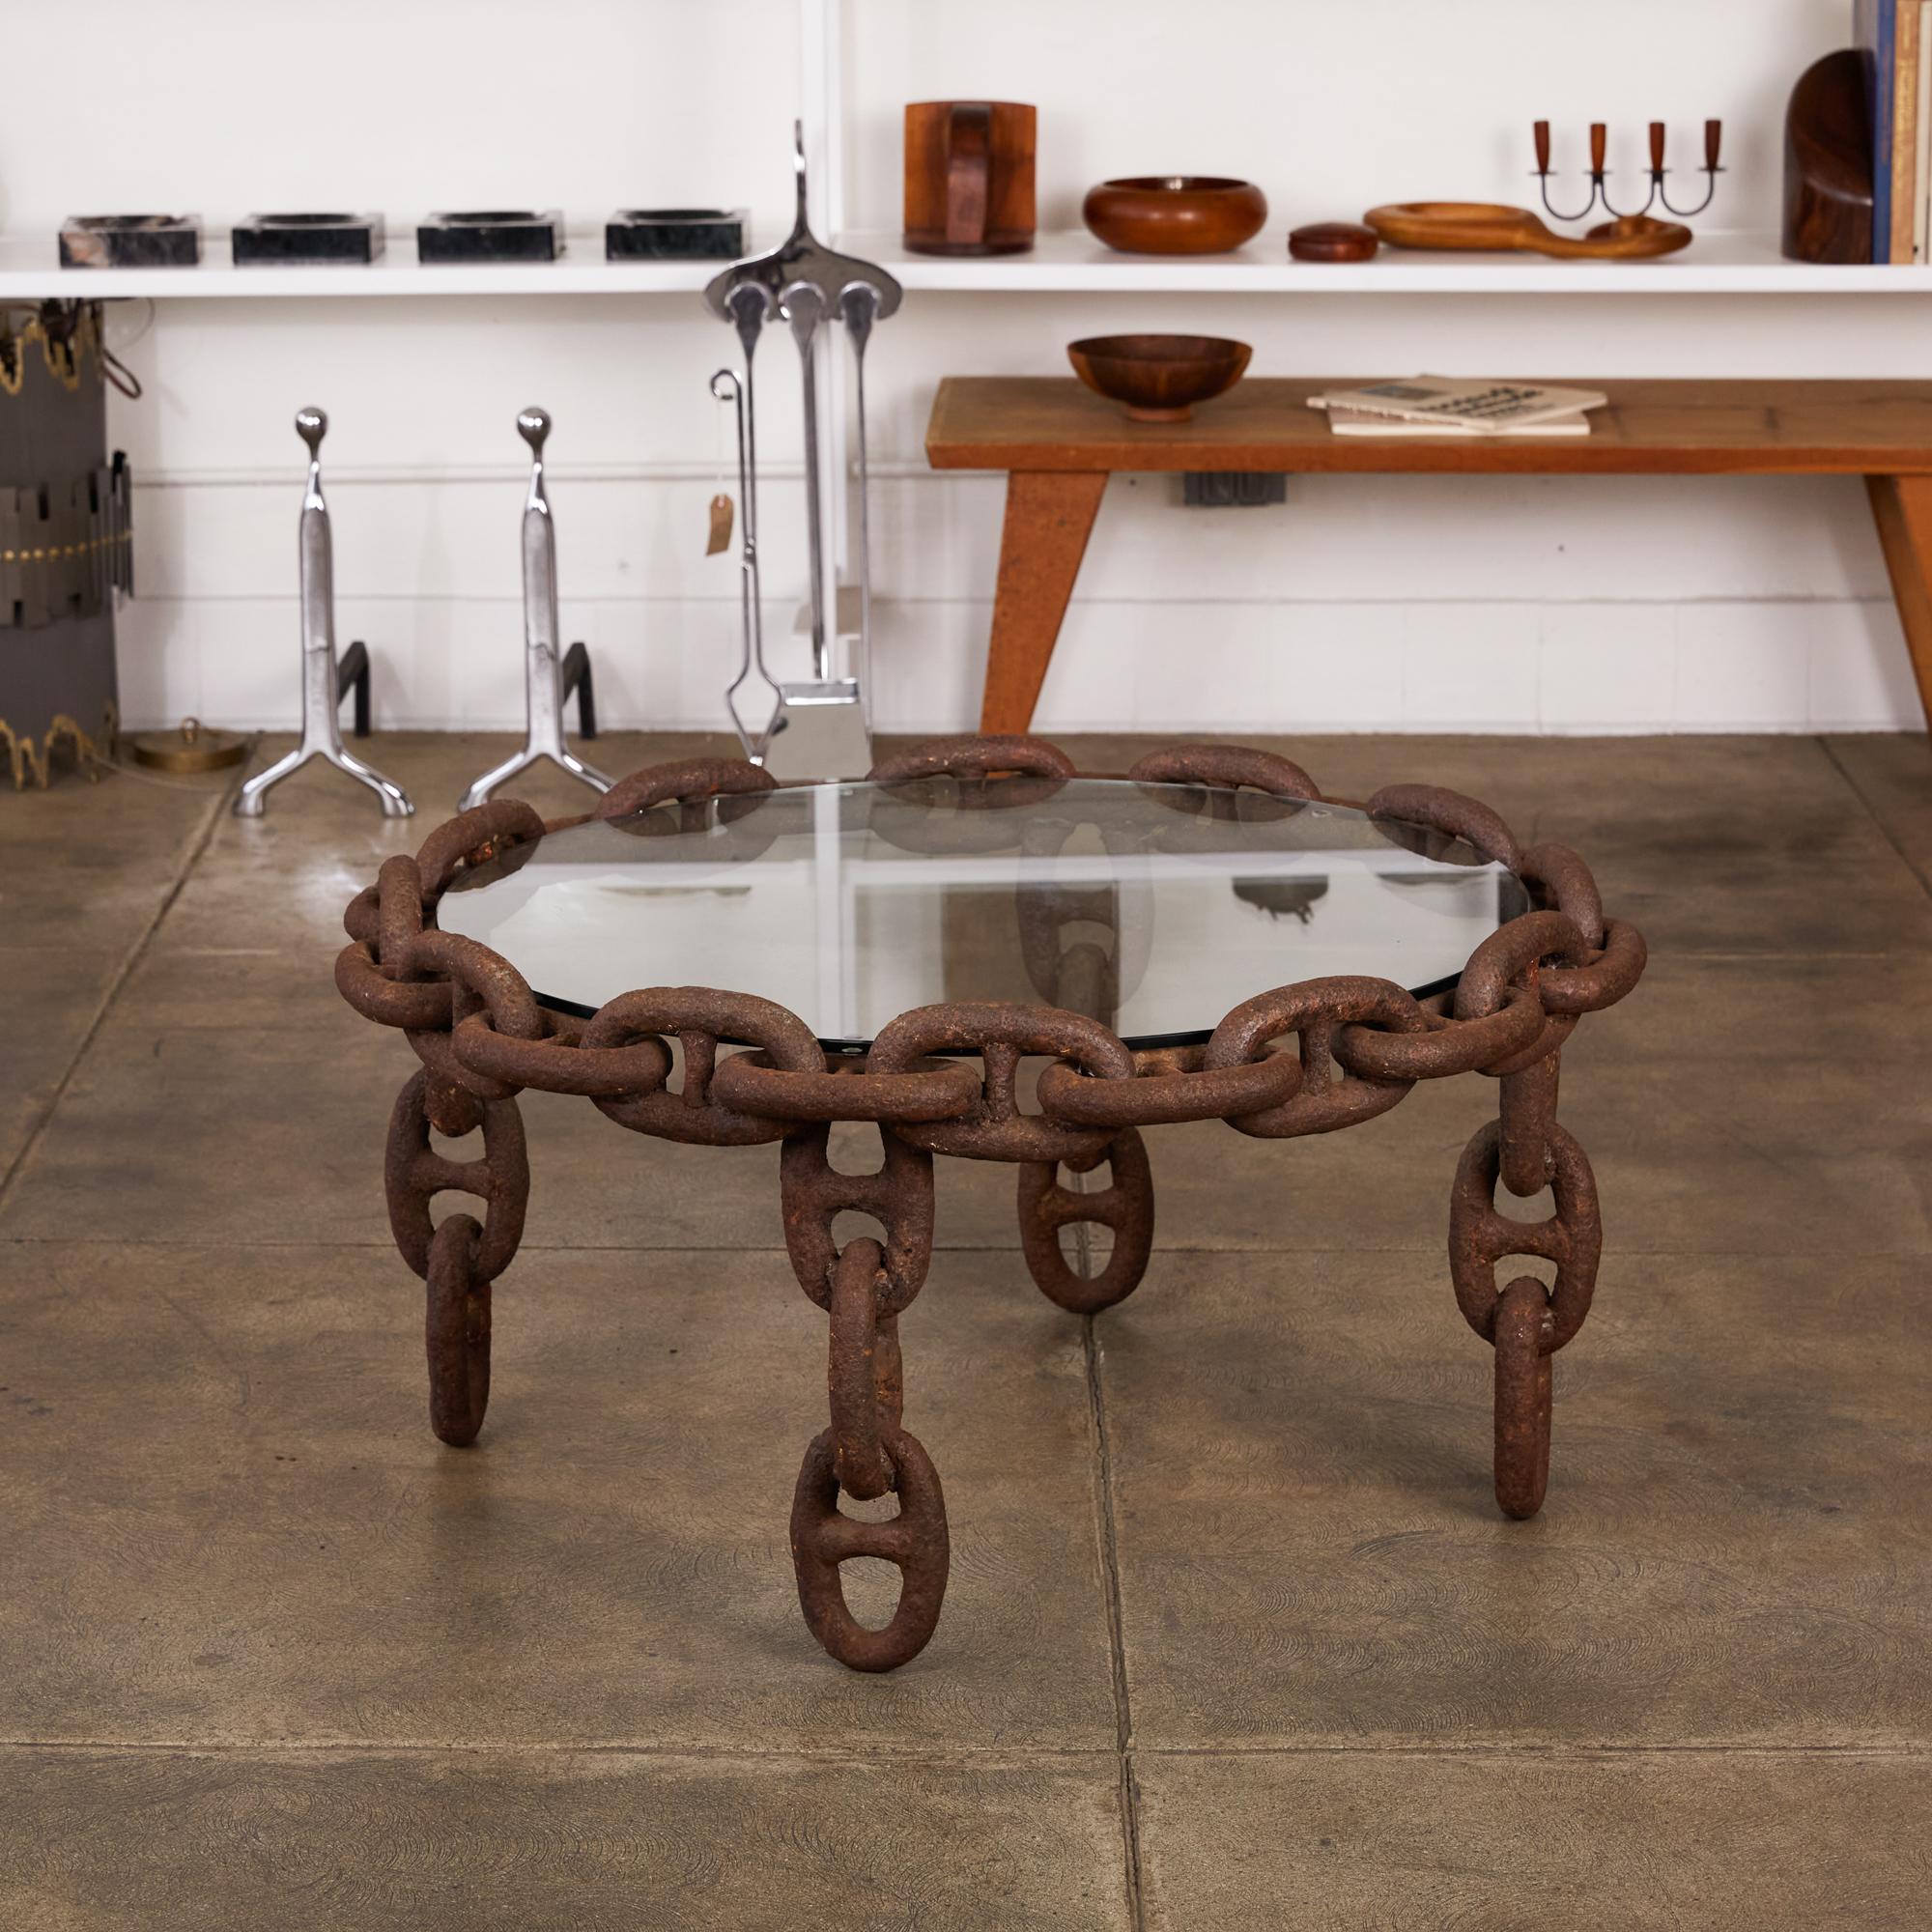 Heavy solid iron stud chain has been skilfully welded to create a perfectly symmetrical round coffee table with four legs. Glass top insets to create the table surface.

Condition: Heavy patinated iron chain. The glass looks to have been replaced